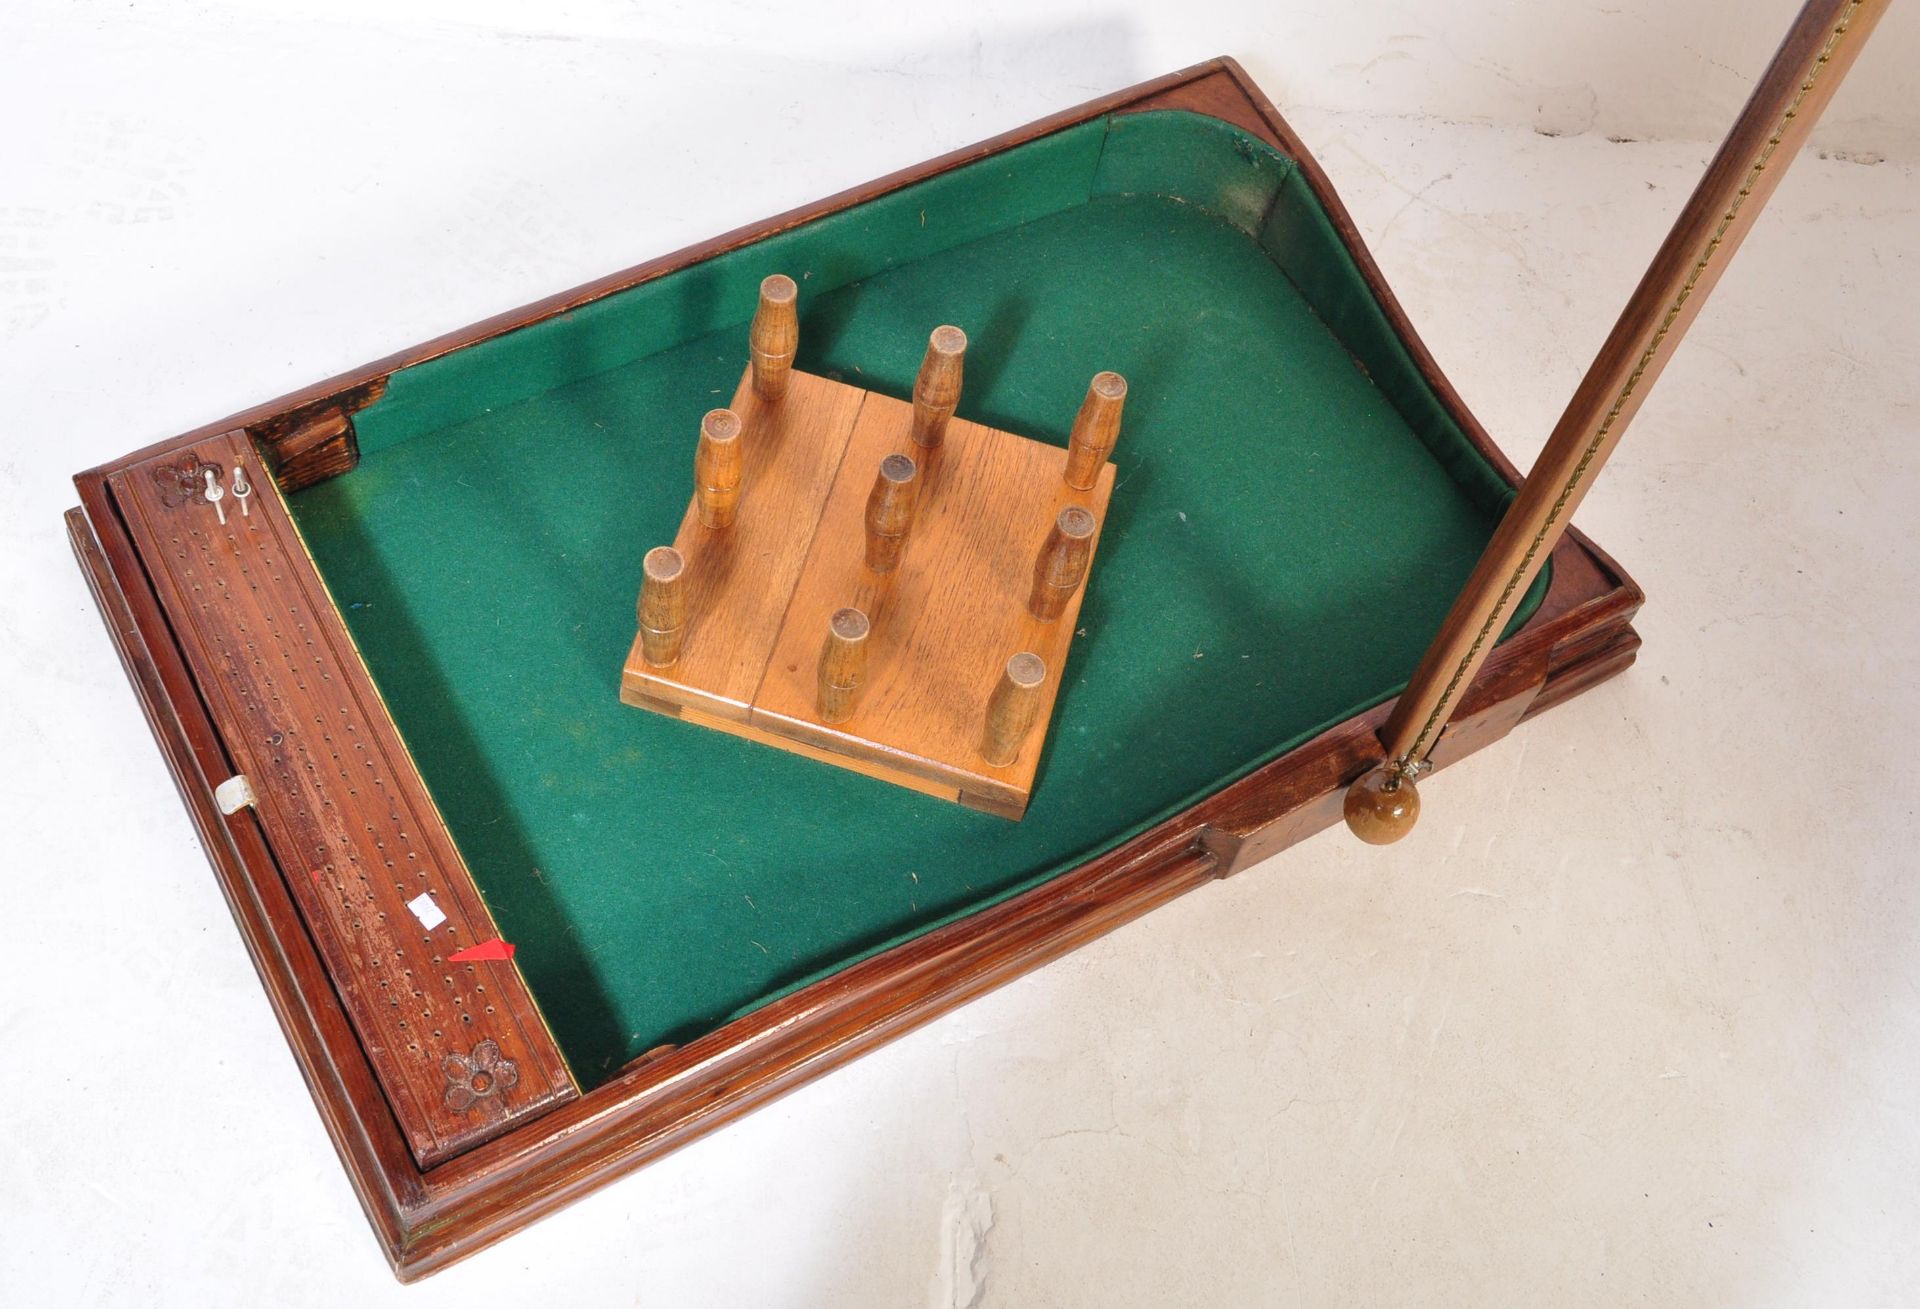 EARLY 20TH CENTURY MAHOGANY TABLE TOP SKITTLES GAME - Image 2 of 6